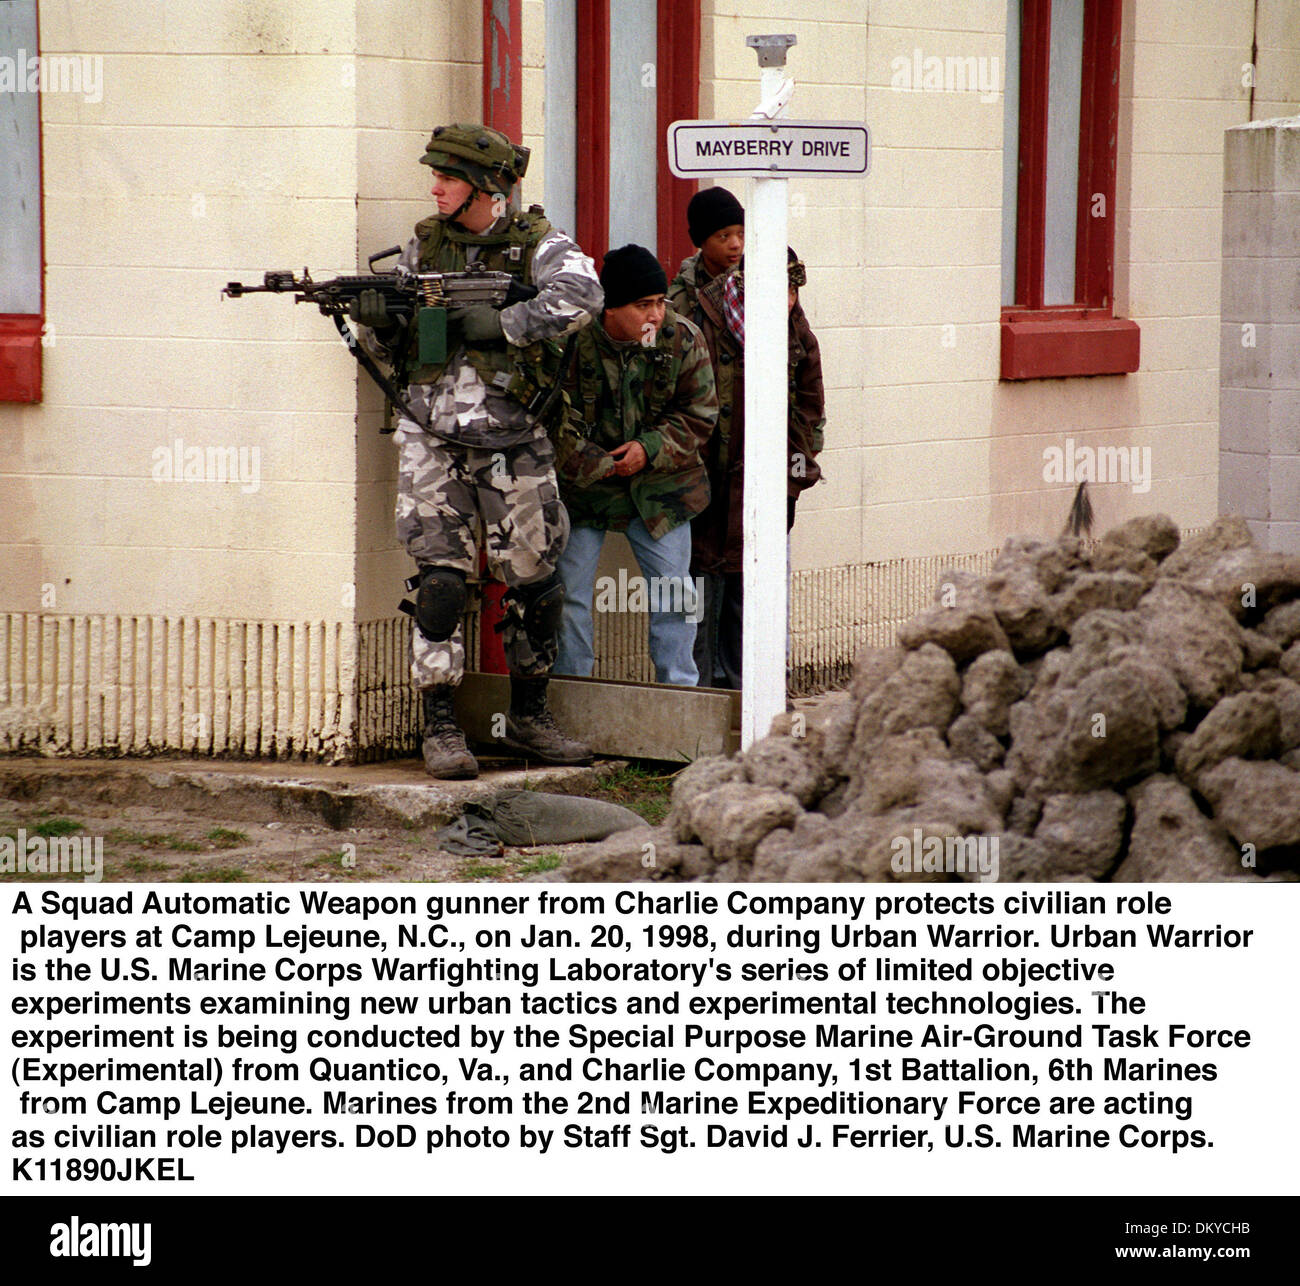 Jan. 1, 1998 - Camp Lejeune, NC, USA - A SAW (Squad Automatic Weapon) gunner from Charlie Company, 1st Battalion, 6th Marines, protects civilian role players at the MOUT (Military Operations in Urban Terrain) facility during LOE 1 (Limited Objective Experiment 1), which is part of the Marine Corps Warfighting Laboratory's Urban Warrior series.  (Released)(Credit Image: © Globe Phot Stock Photo